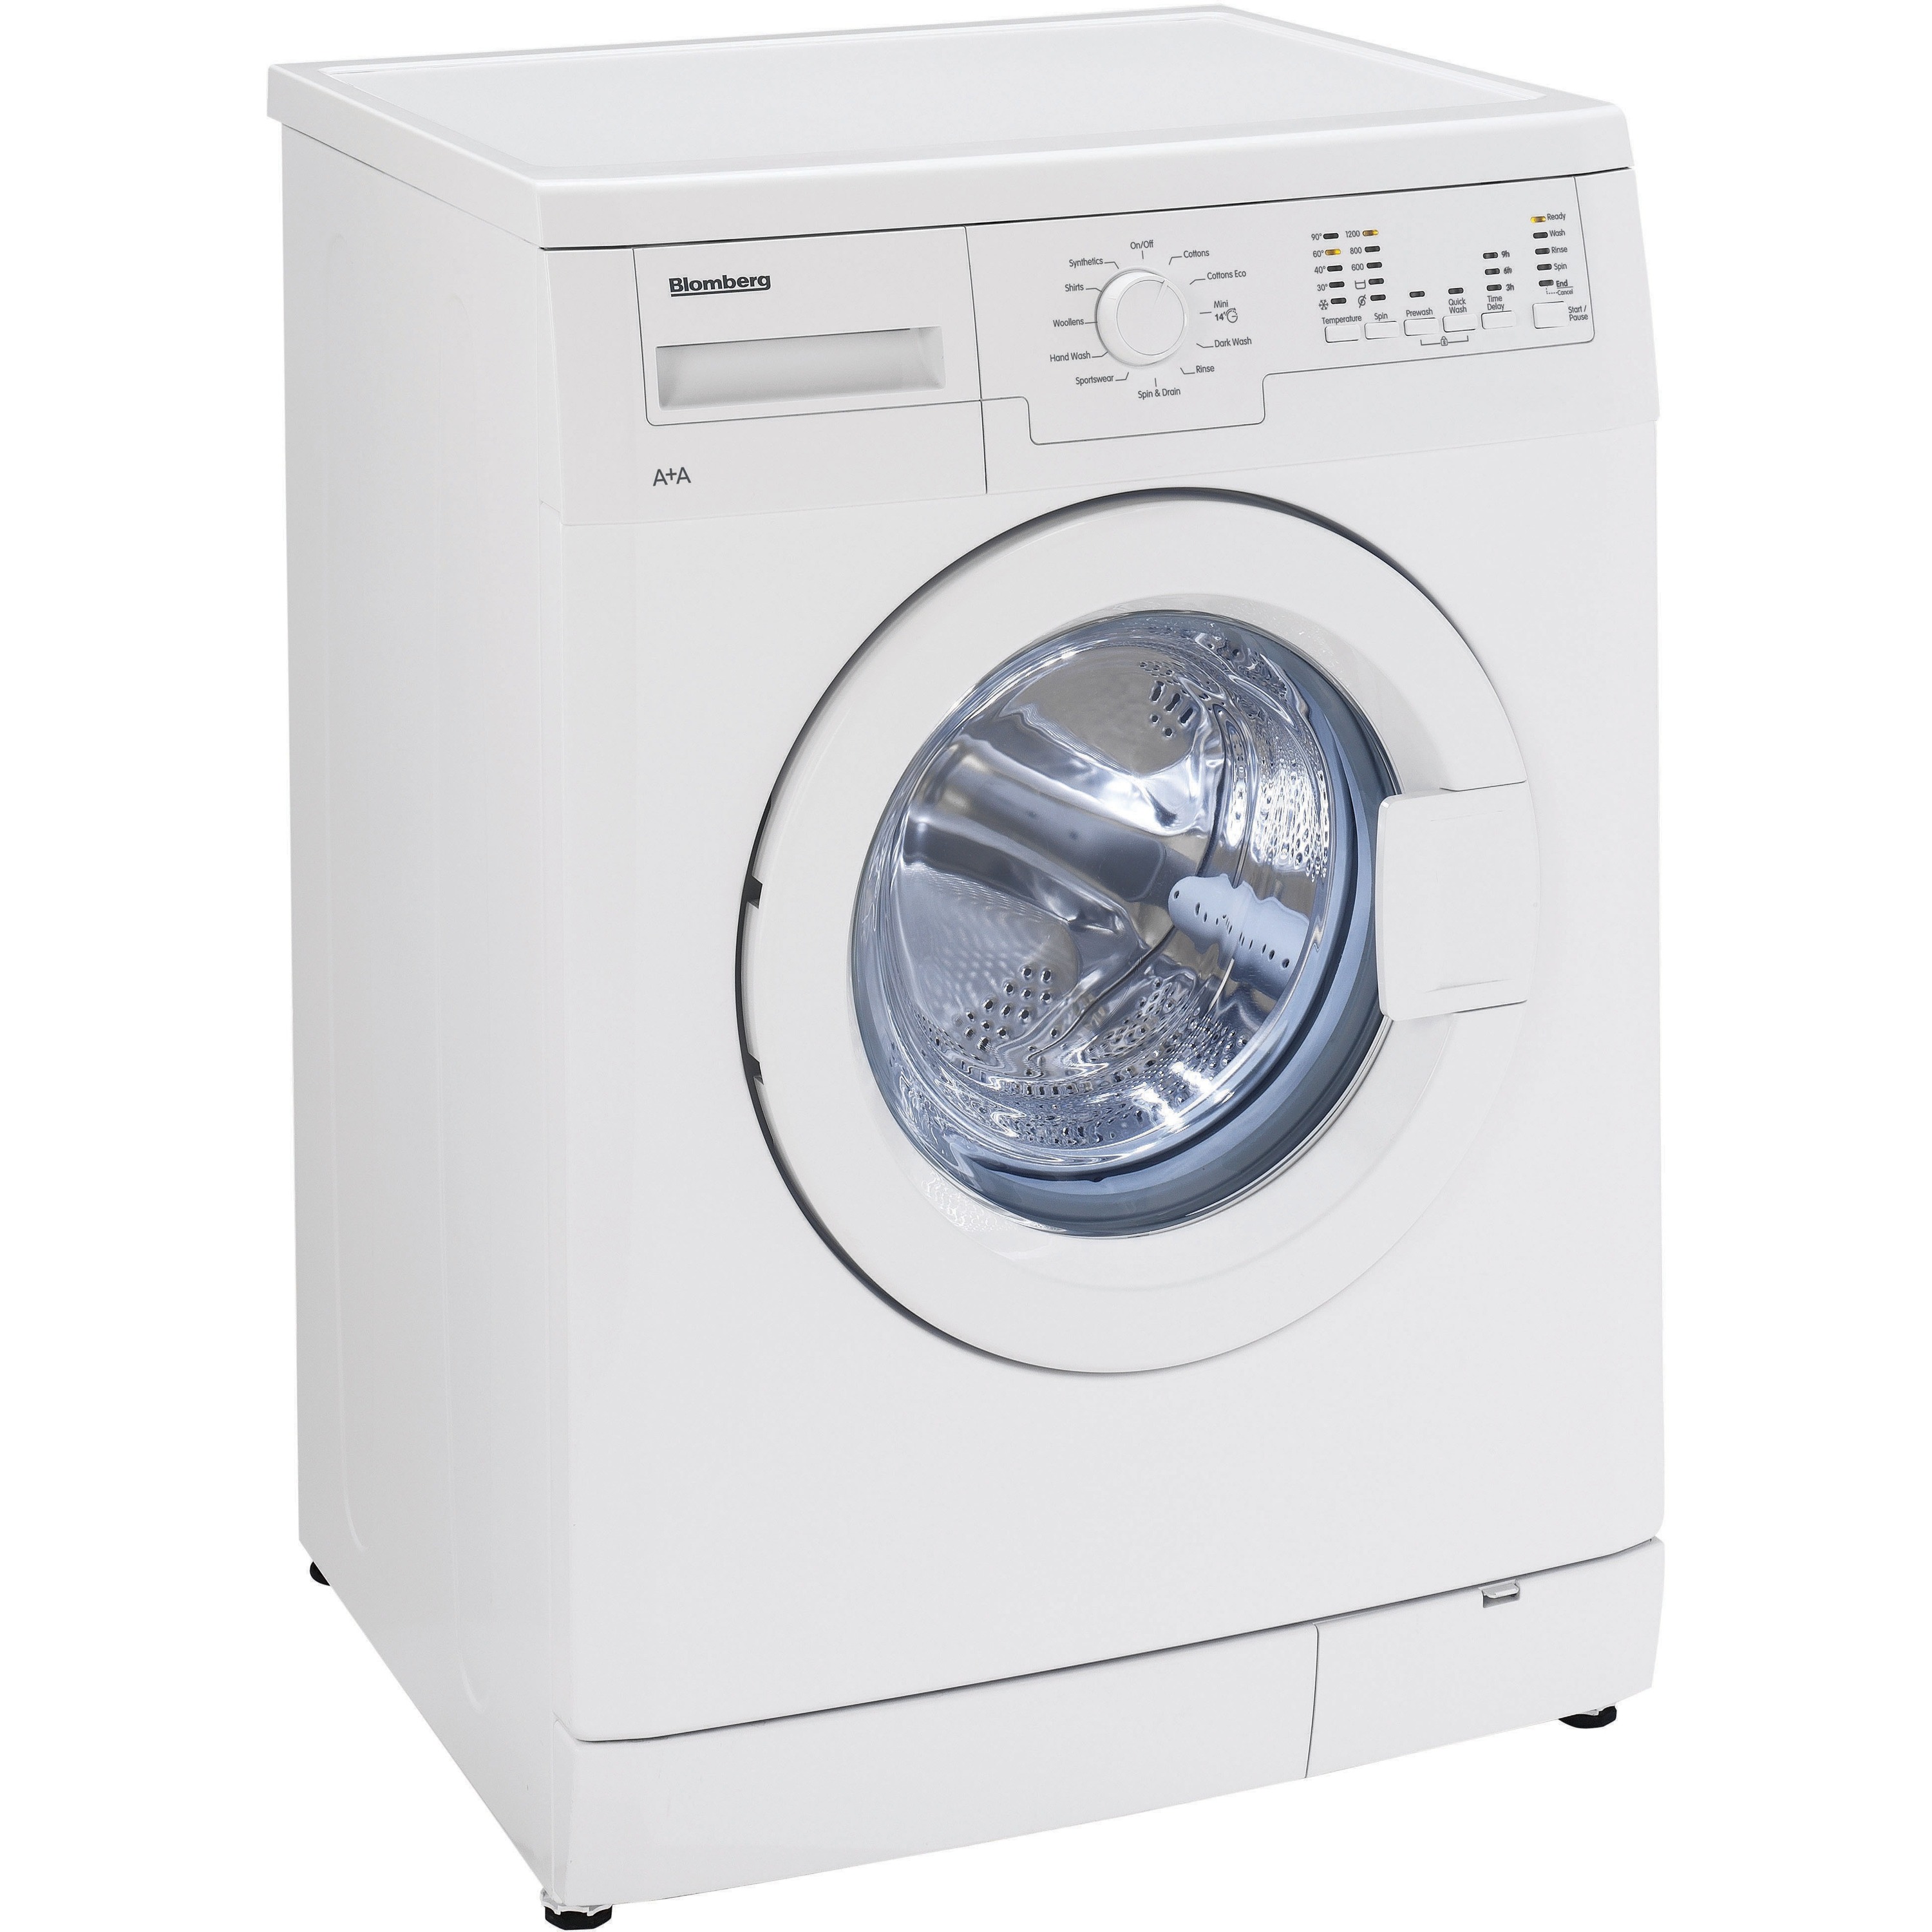 Where can you find Blomberg appliance reviews?